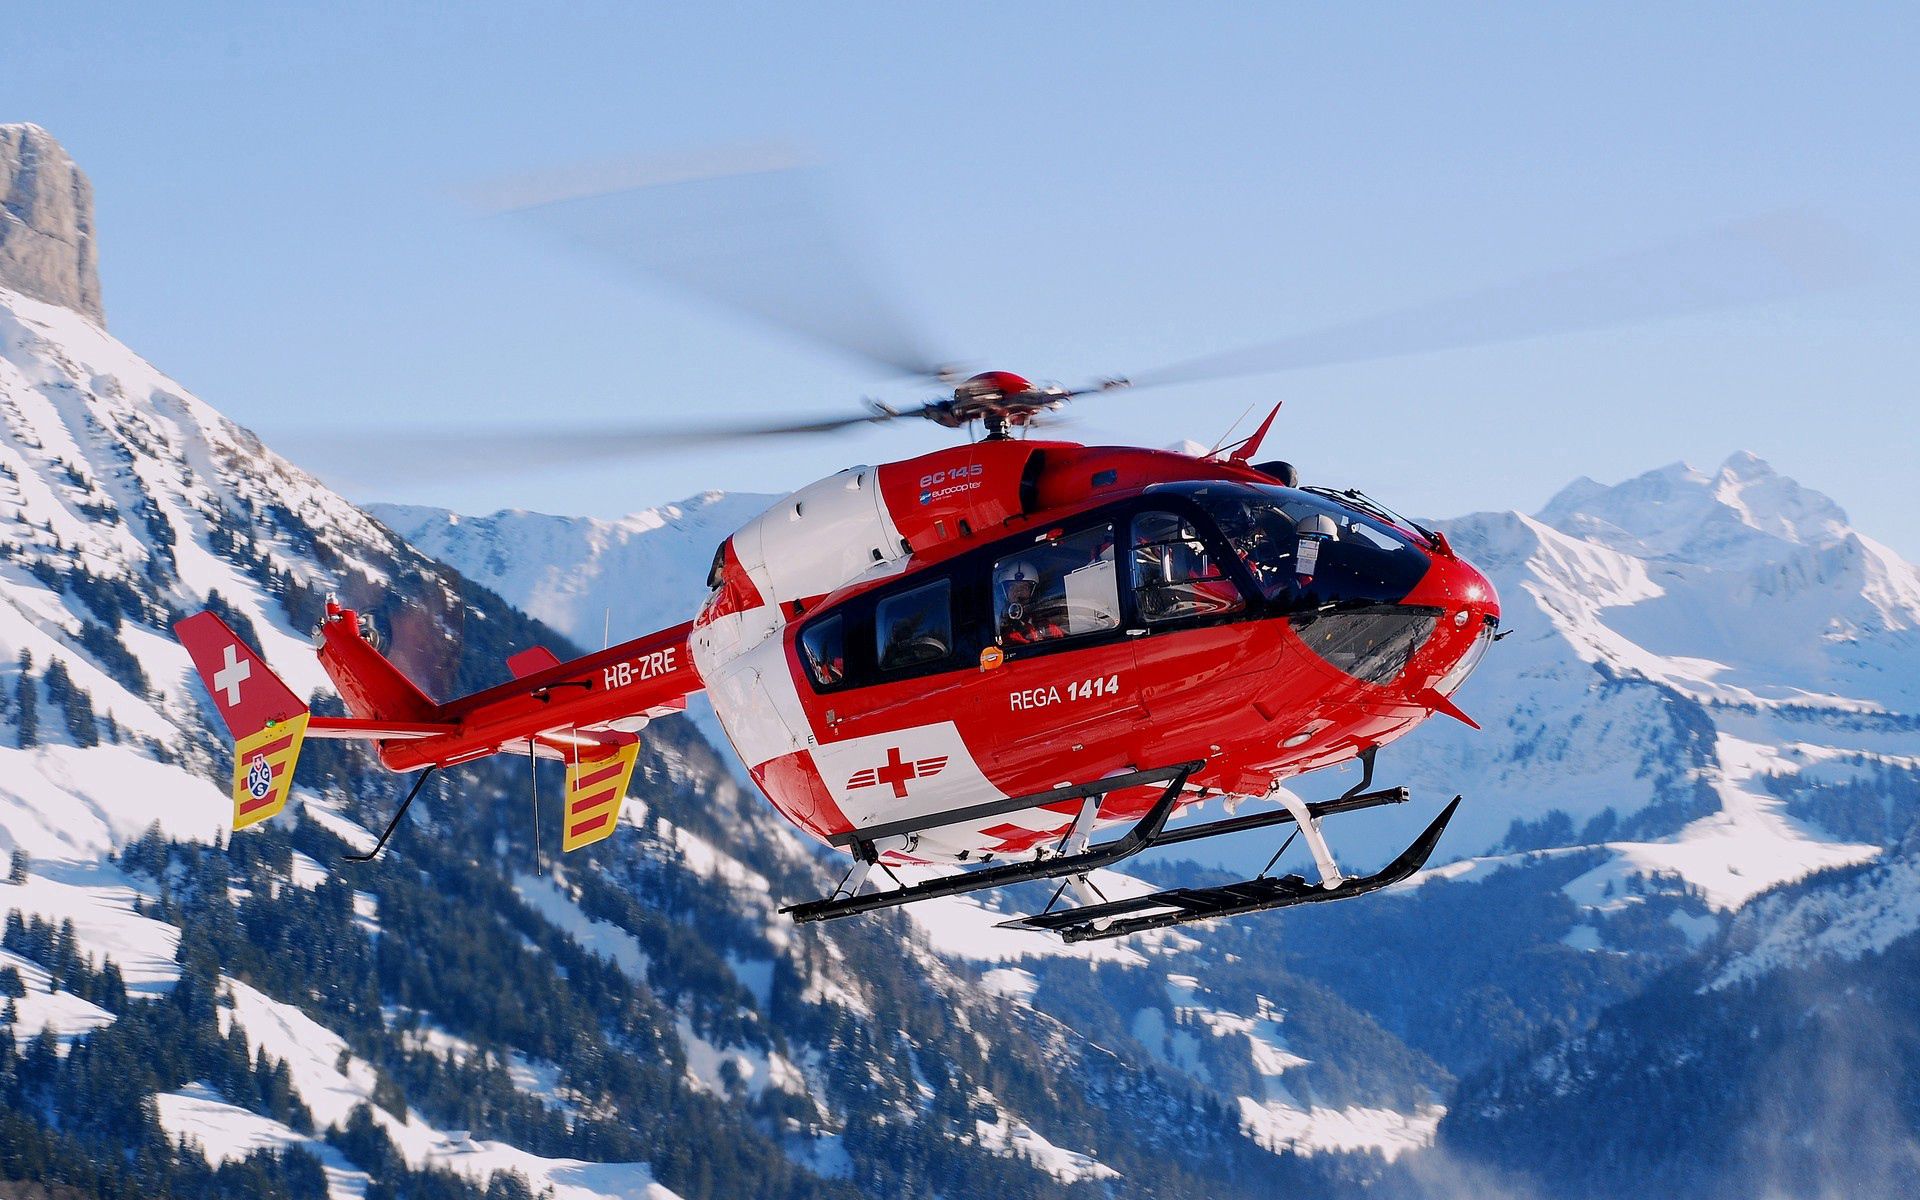 android rescue helicopter, sky, helicopter, mountains, miscellanea, miscellaneous, flight